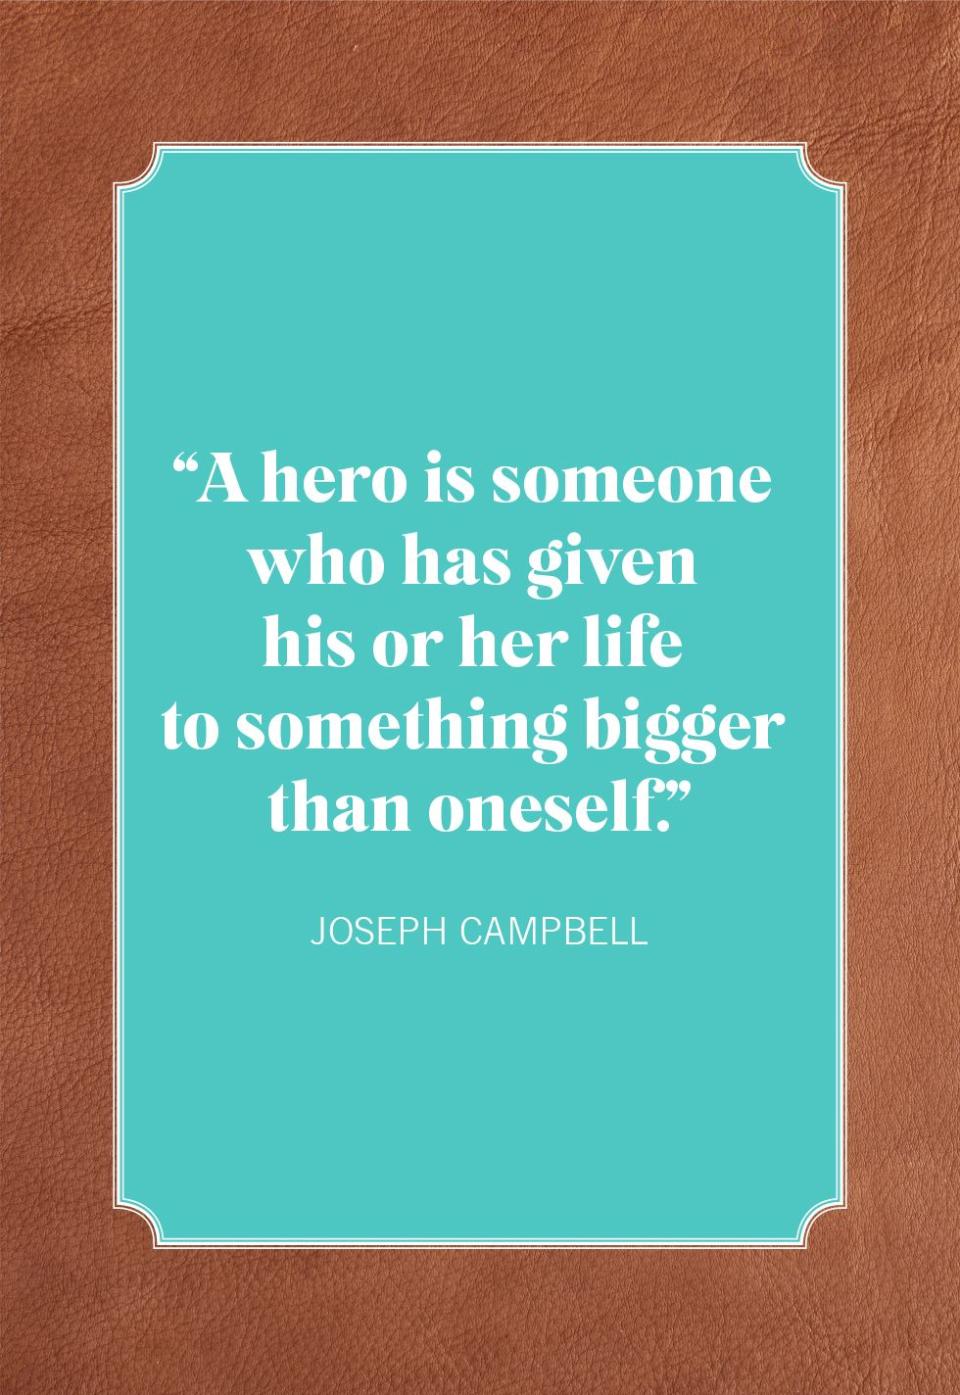 memorial day quotes joseph campbell